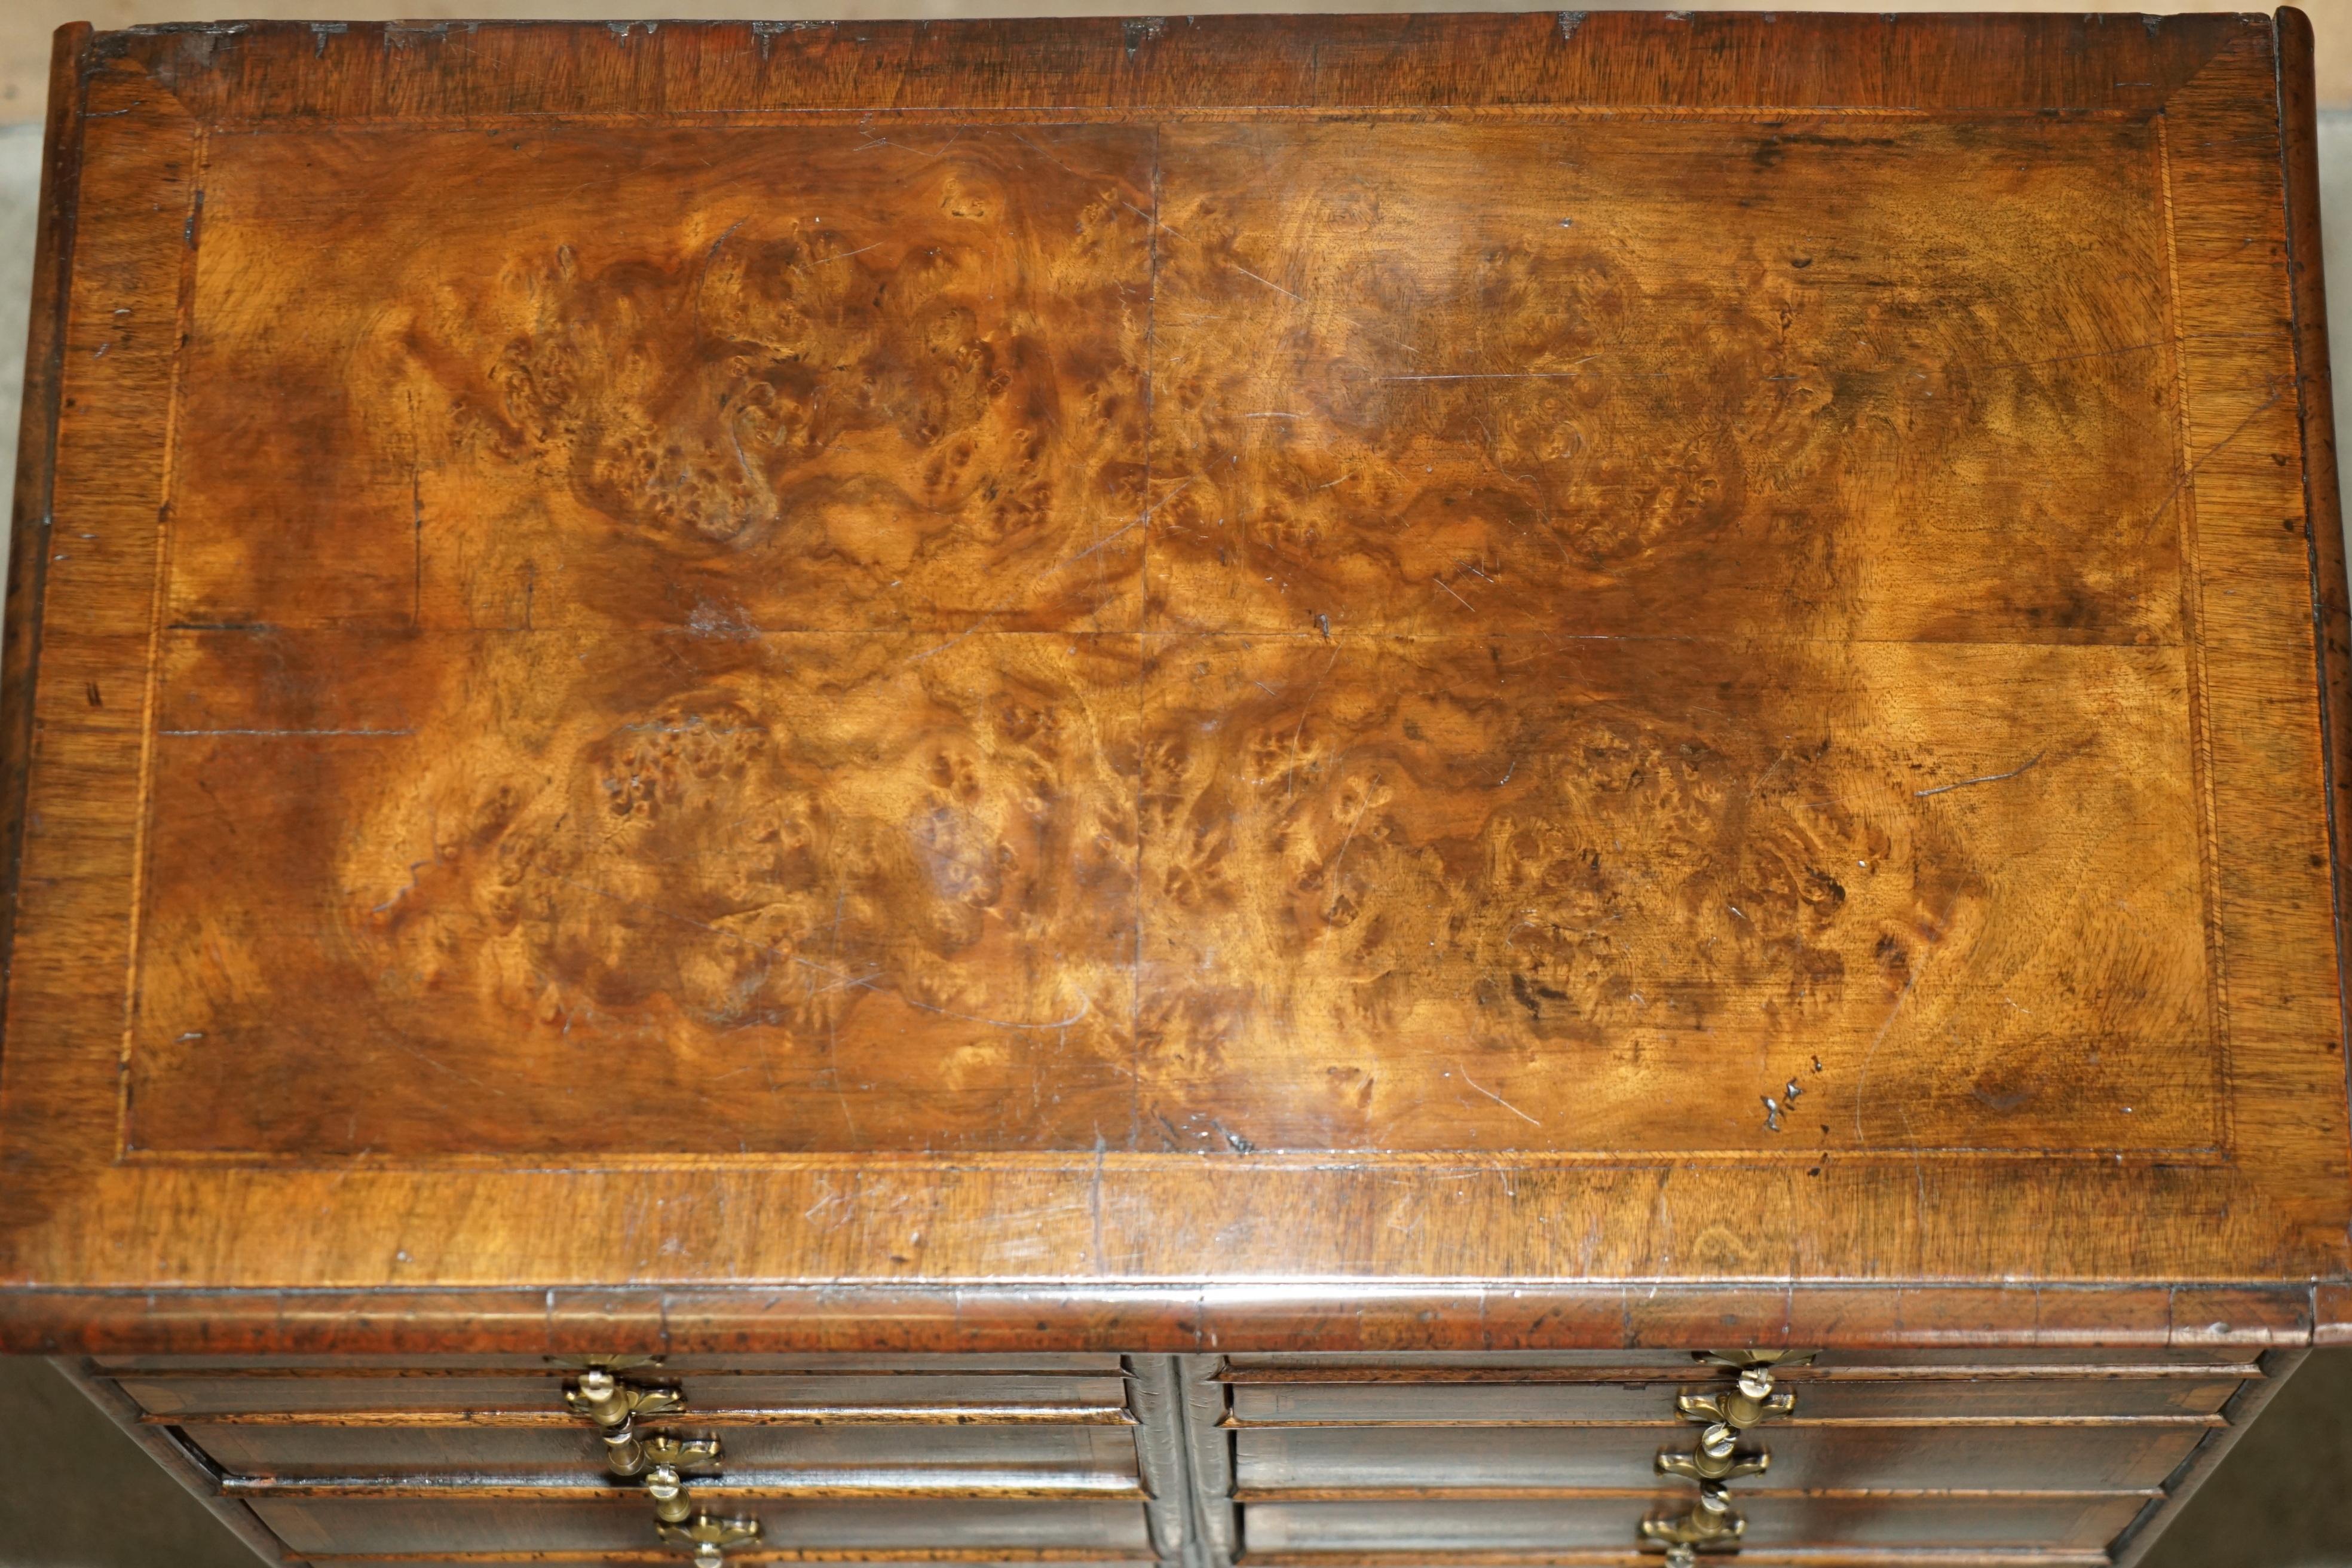 EXQUISITE ANTIQUE CIRCA 1760 BURR WALNUT GEORGE III BANK / CHEST OF DRAWERs For Sale 4